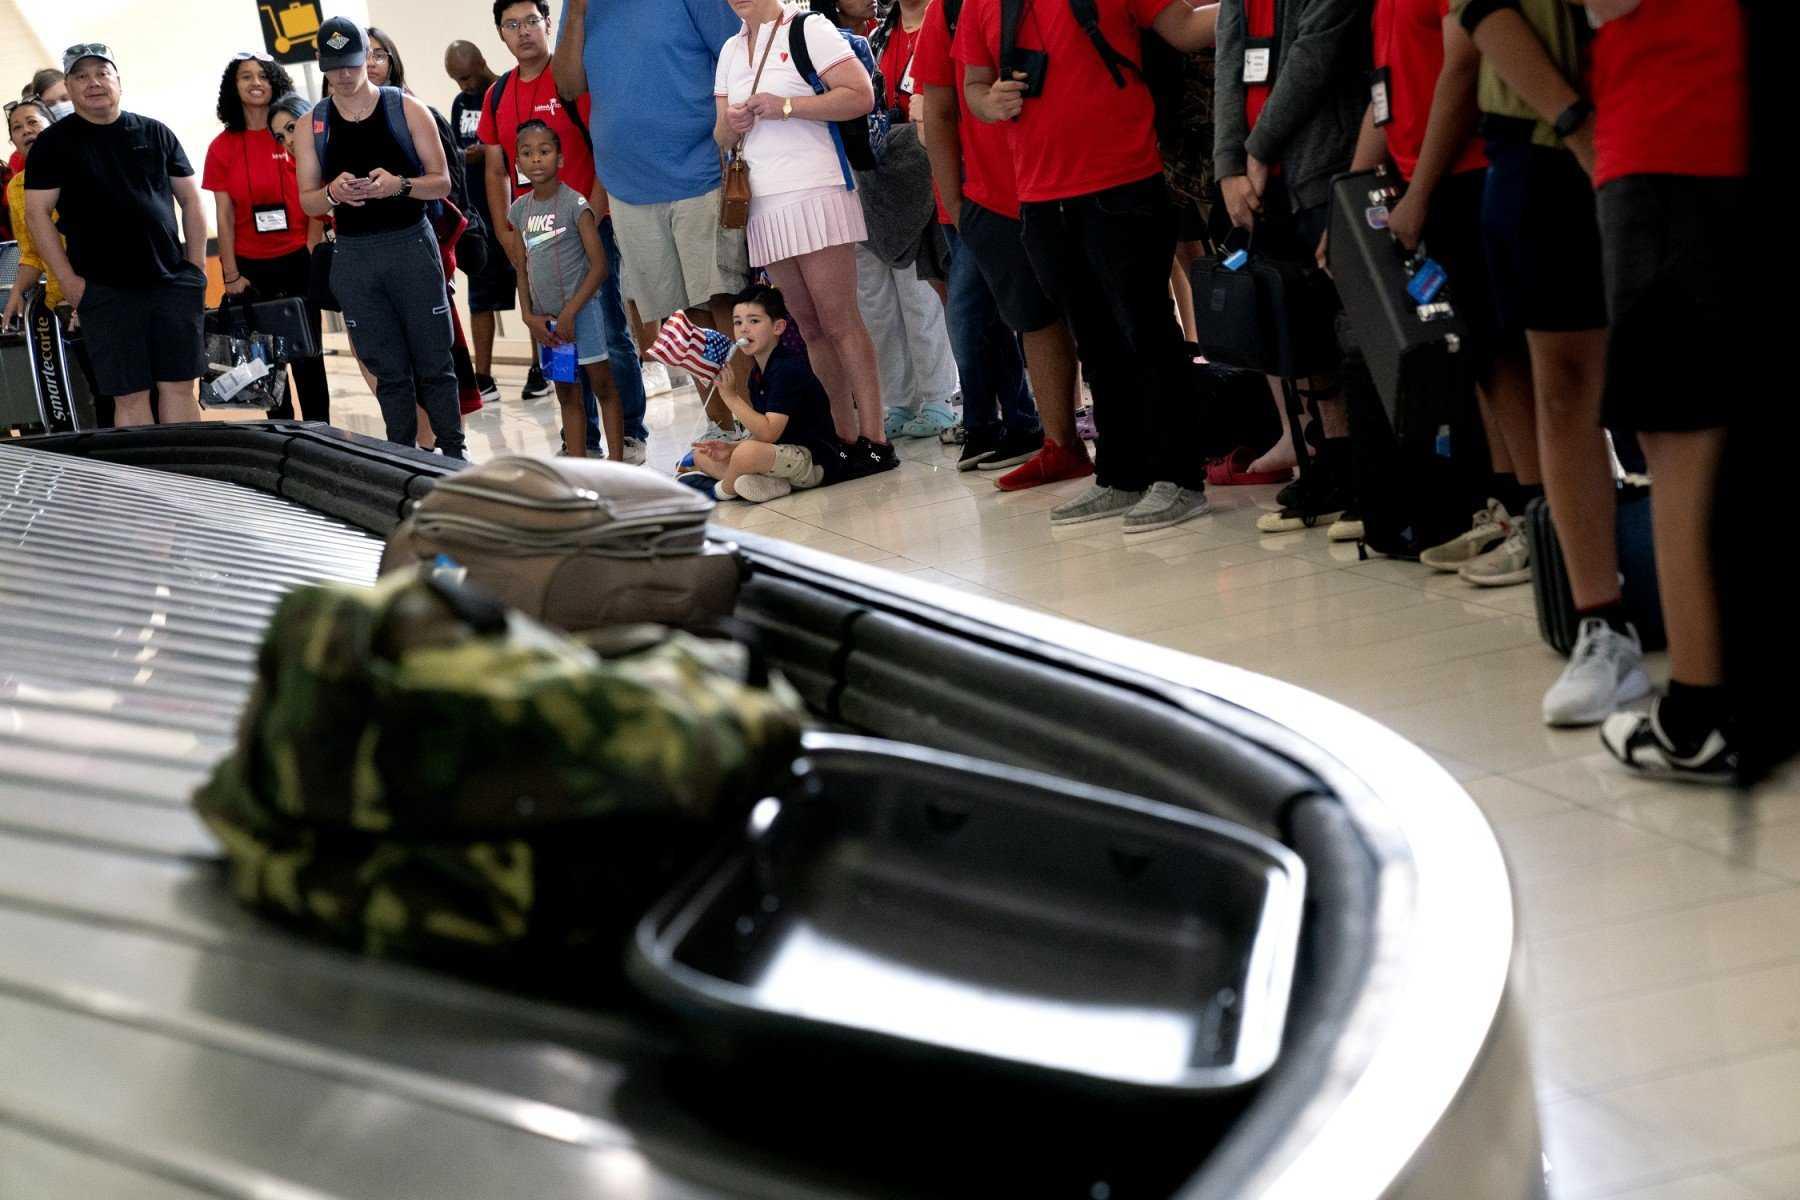 A child holds a US flag balloon as travellers wait for their luggage at Ronald Reagan Washington National Airport in Arlington, Virginia, on July 2. Photo: AFP